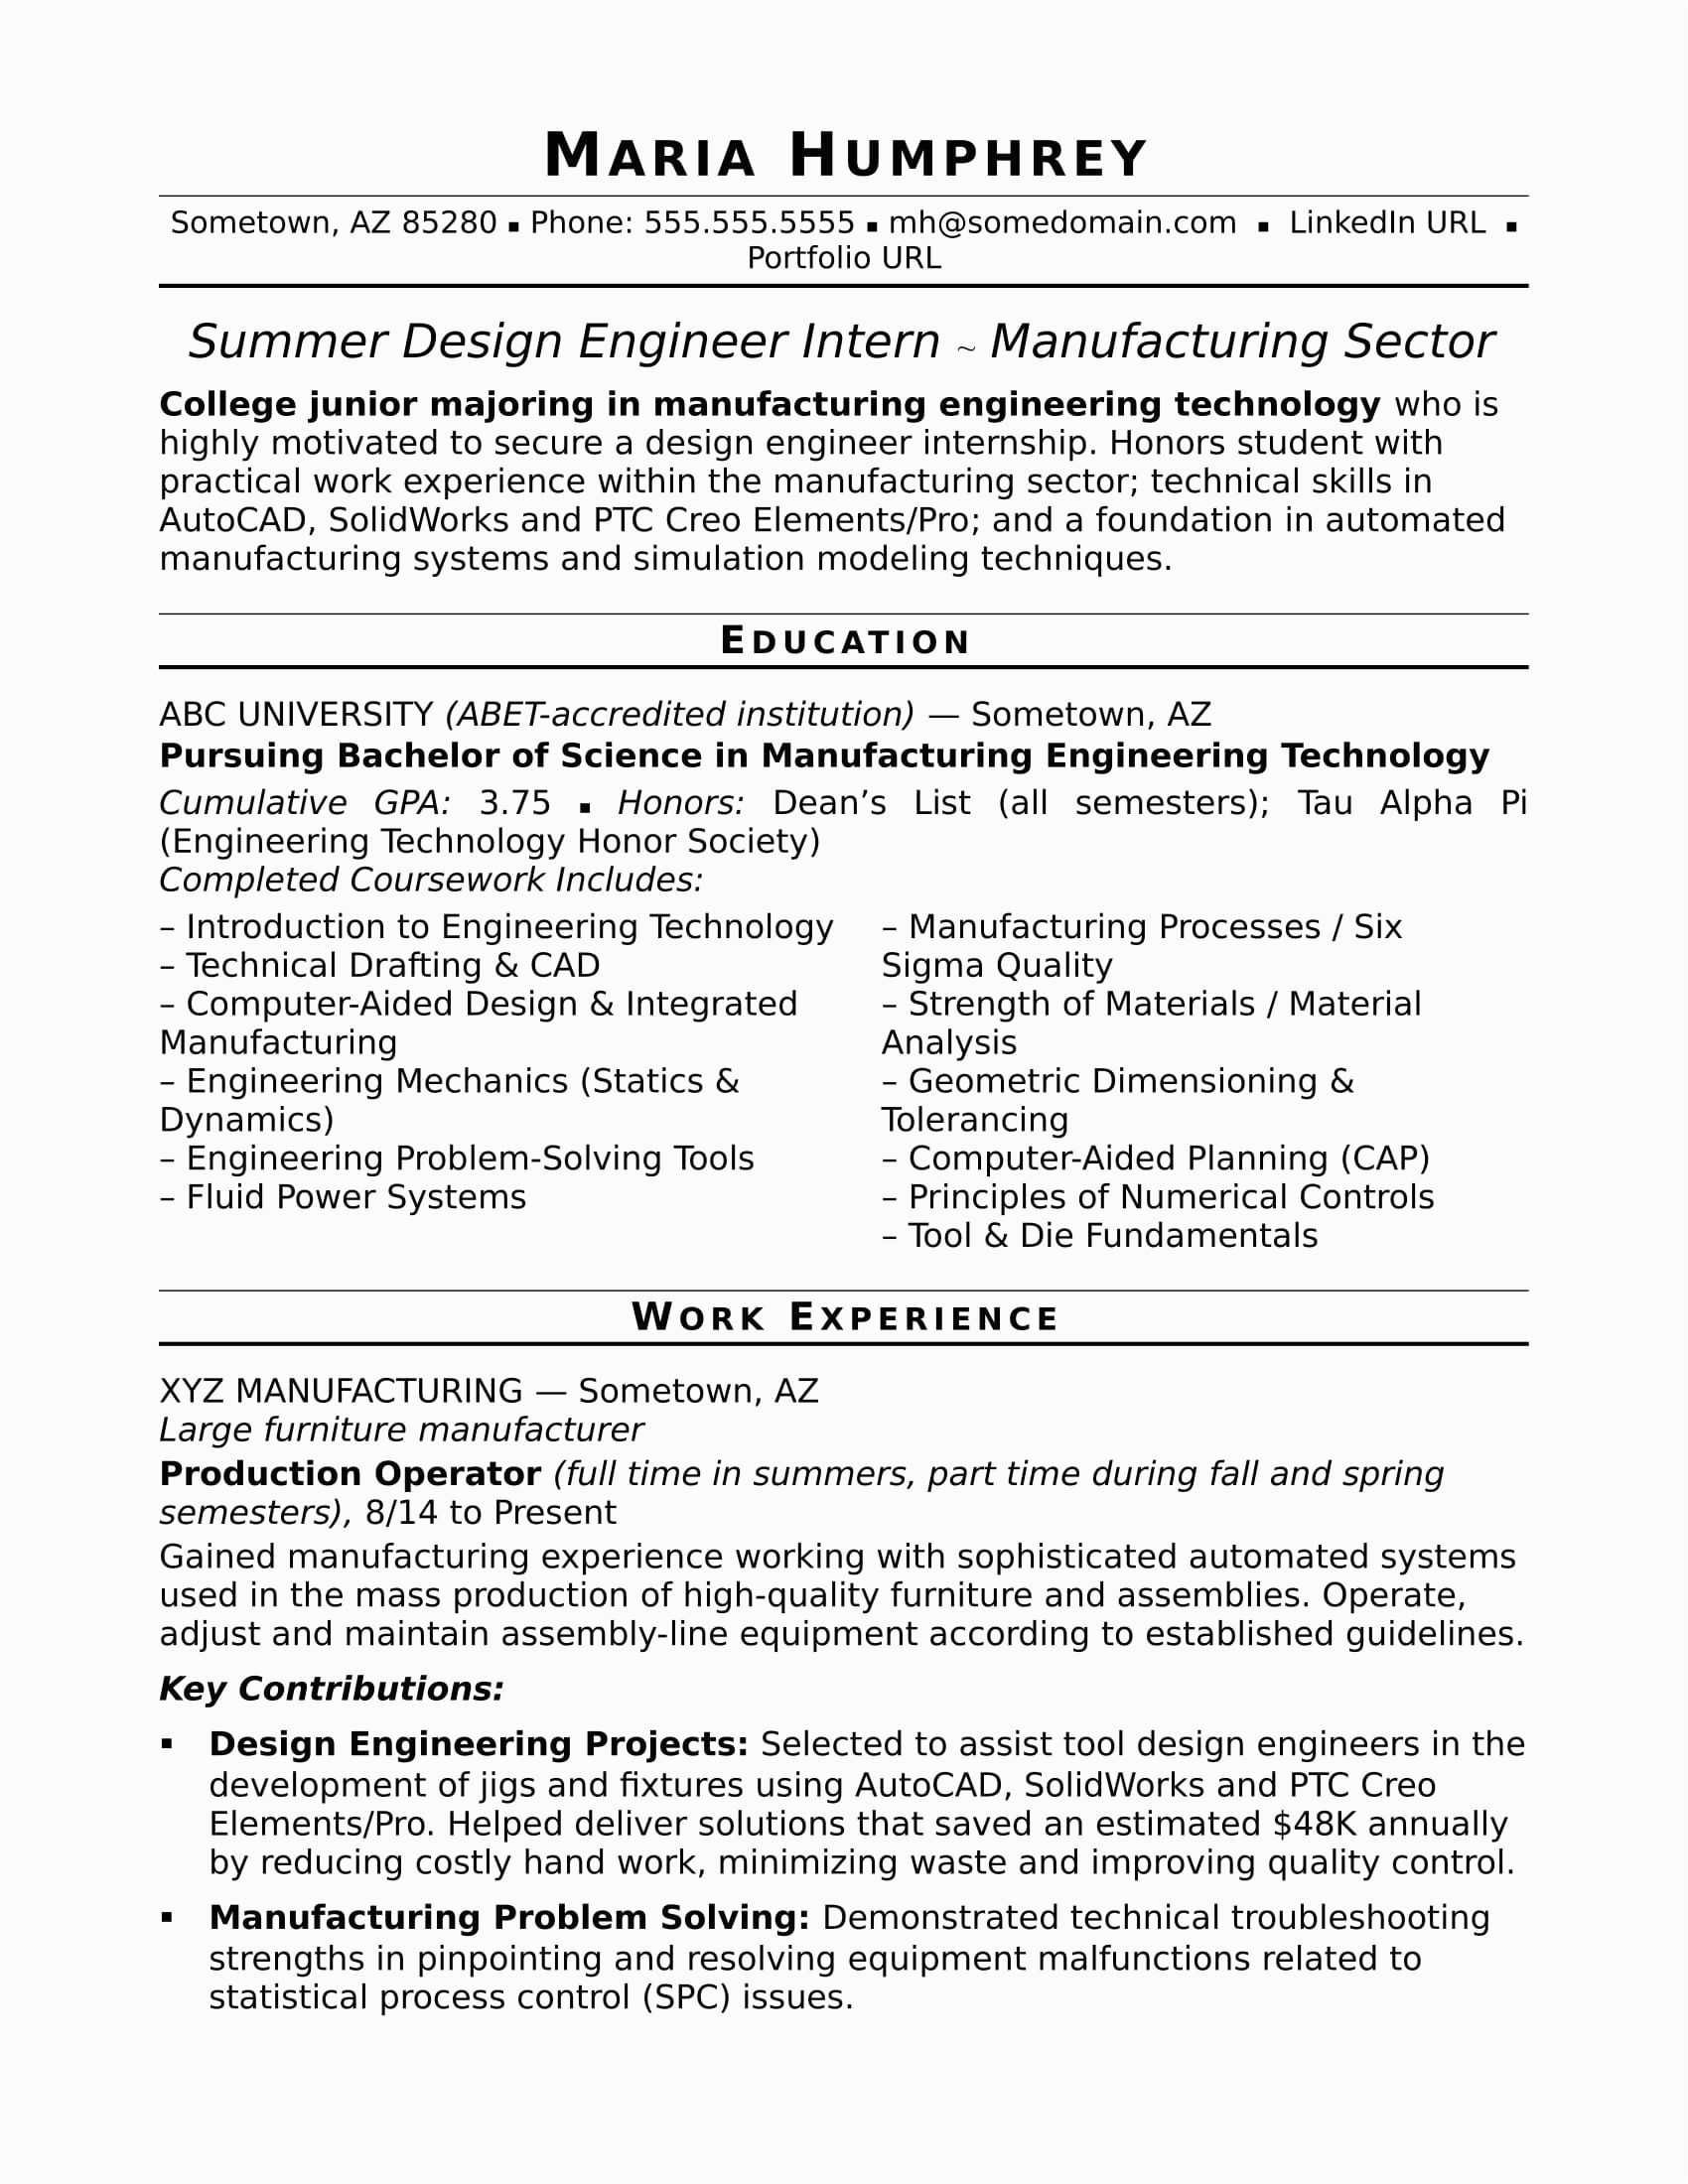 Sample Resume for Entry Level Electrical Engineer Entry Level Electrical Engineering Resume Sample February 2021